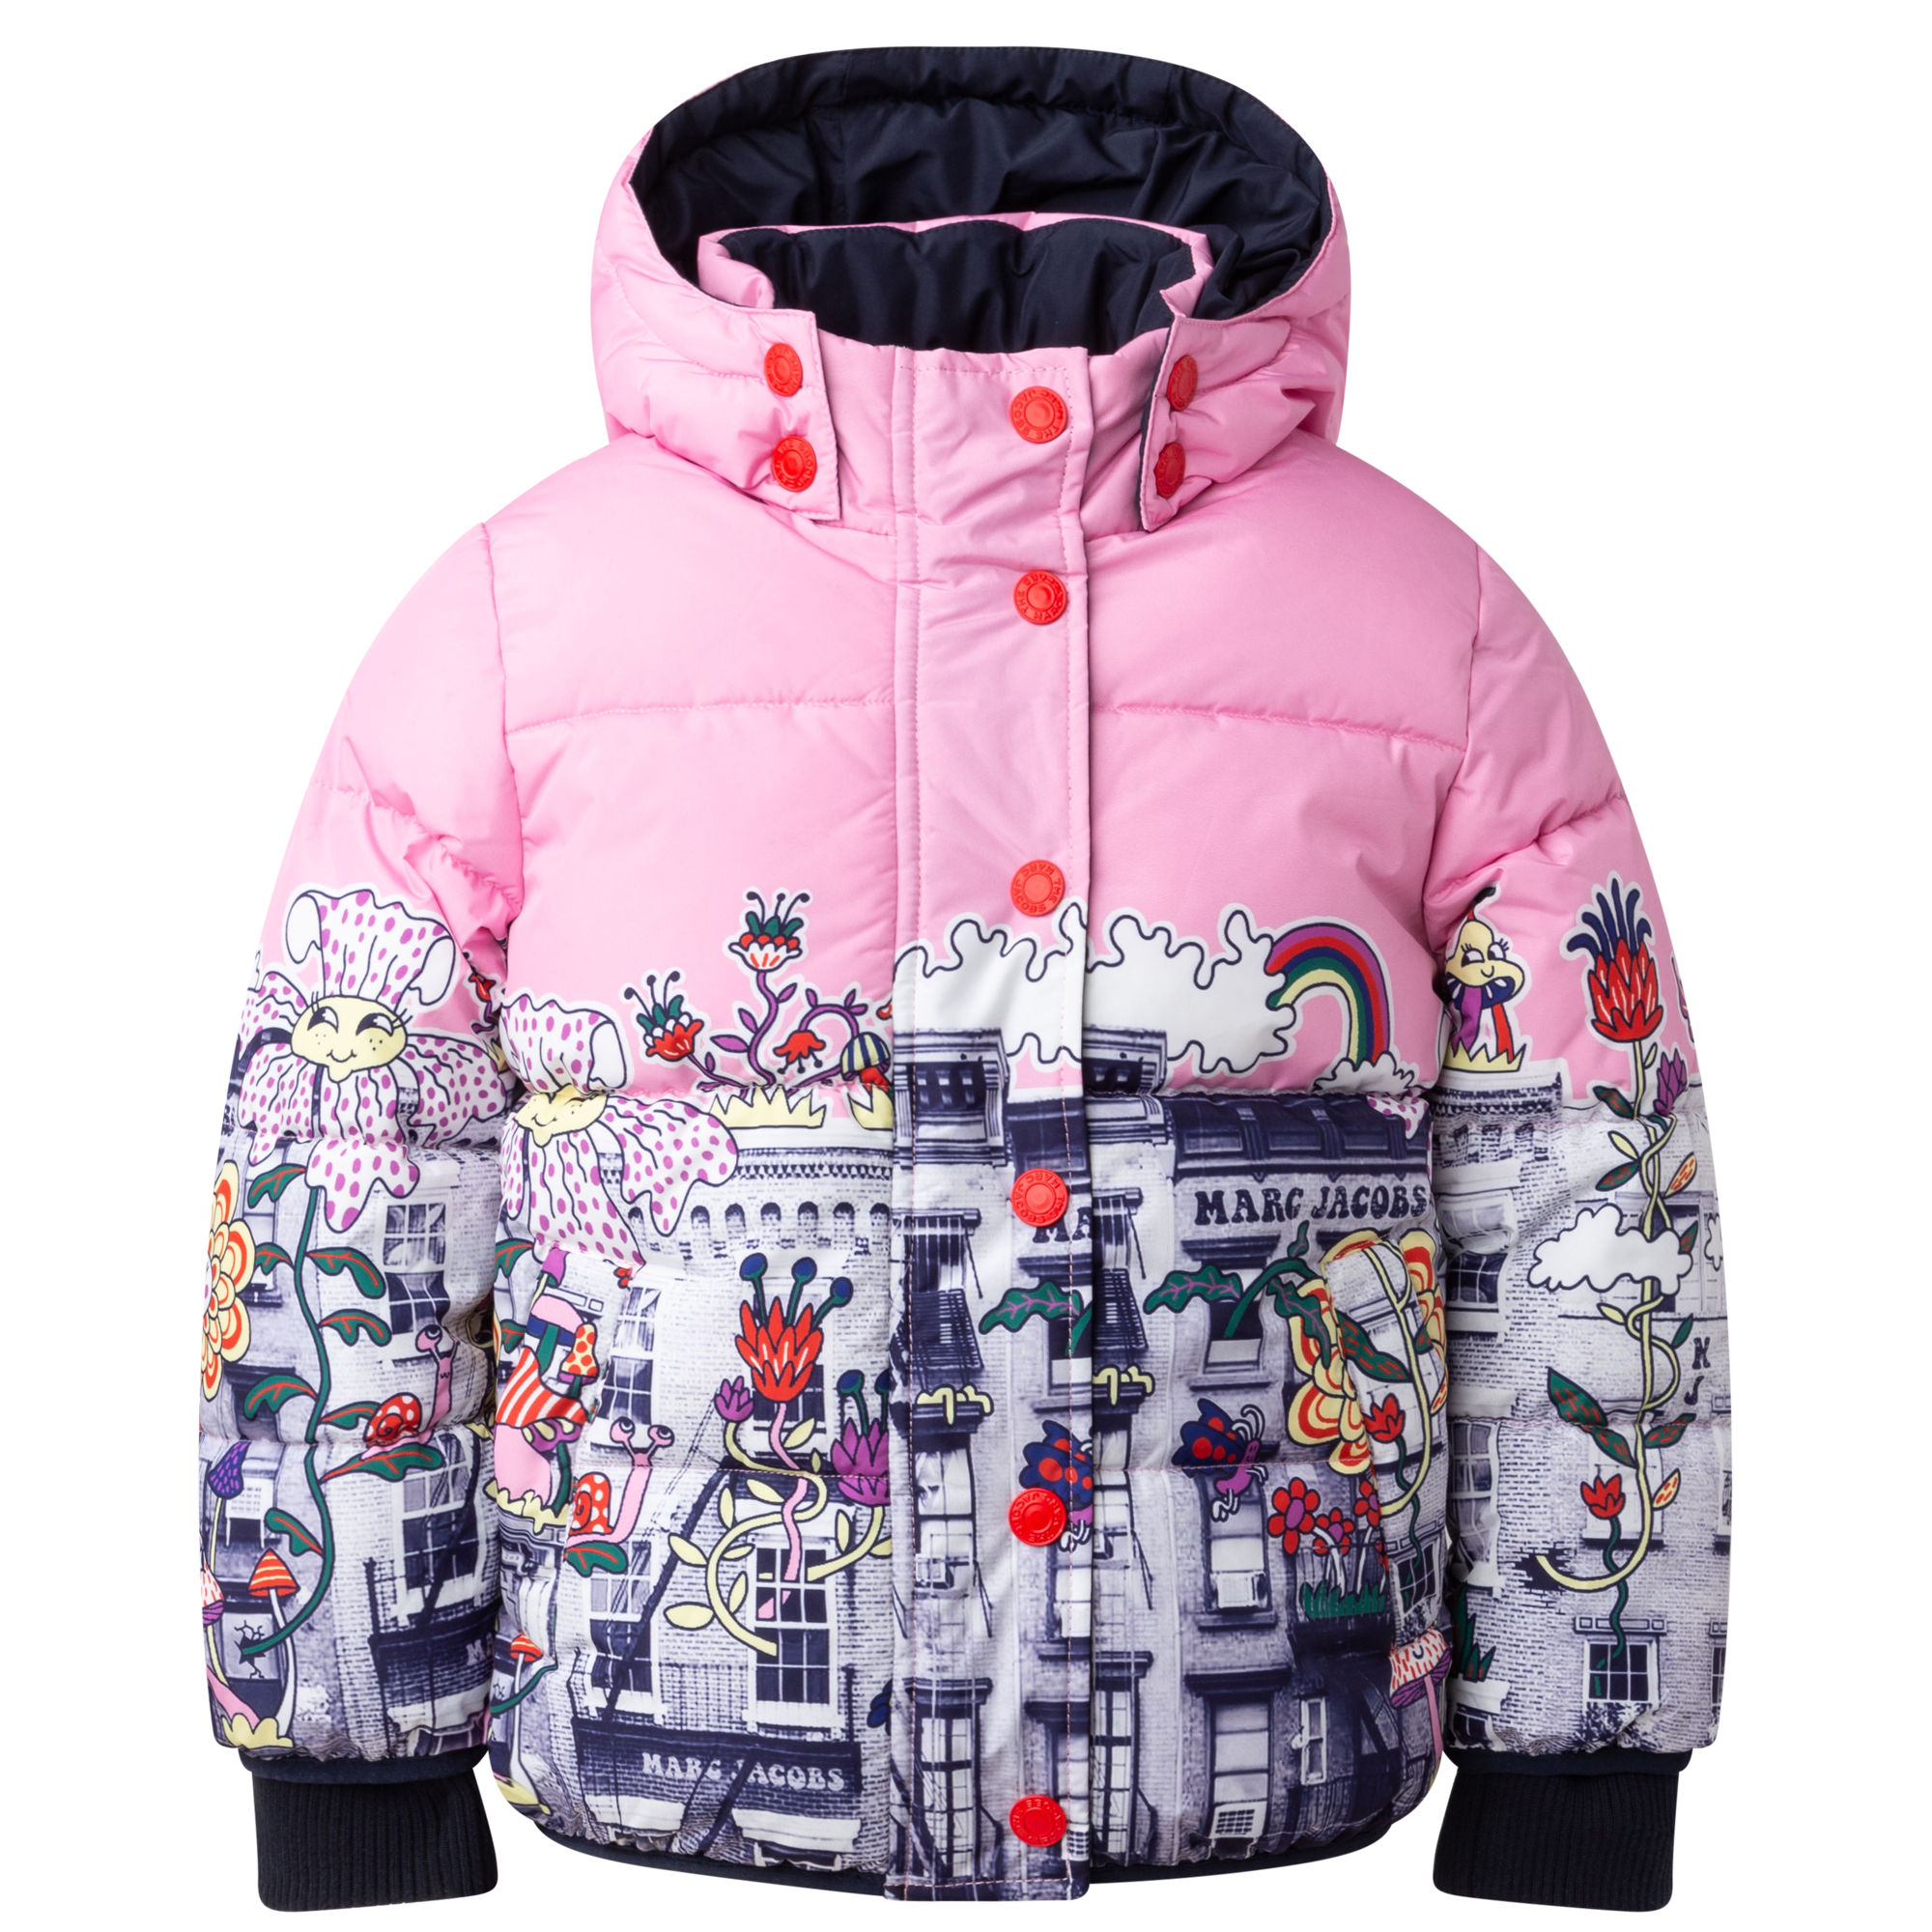 Hooded printed puffer jacket MARC JACOBS for GIRL